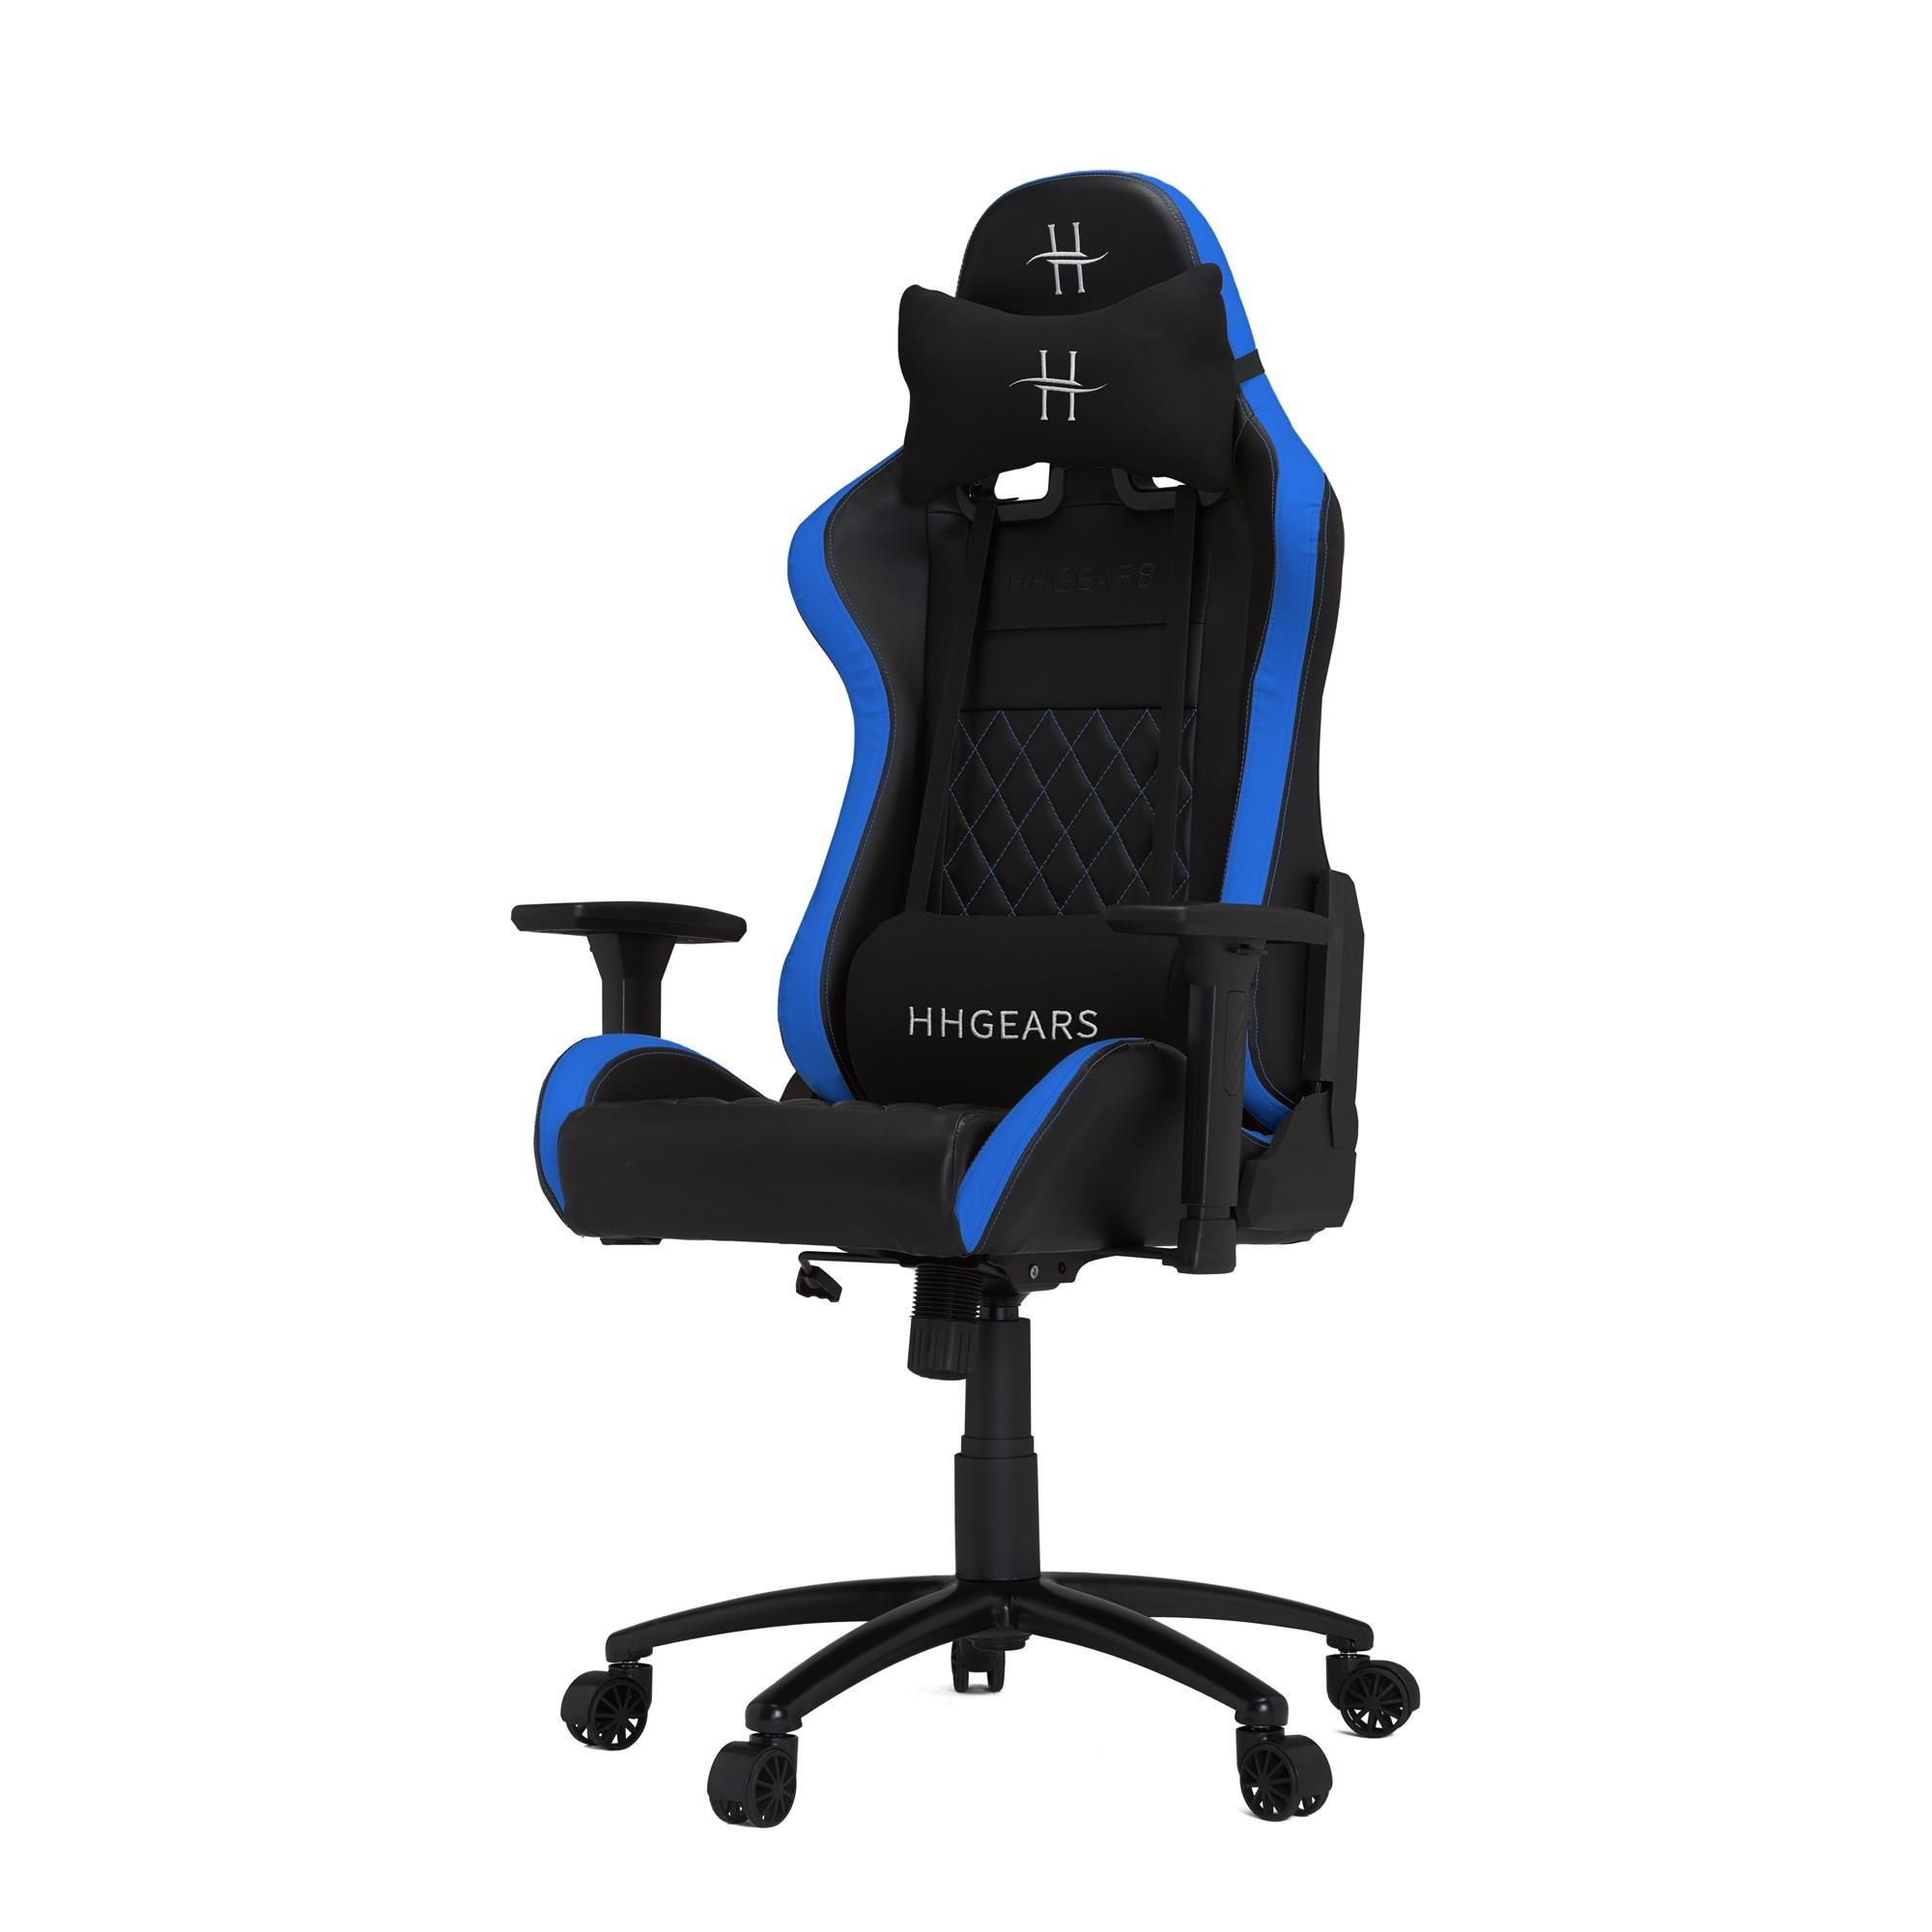 XL500 Black and Blue Gaming Chair GameStop